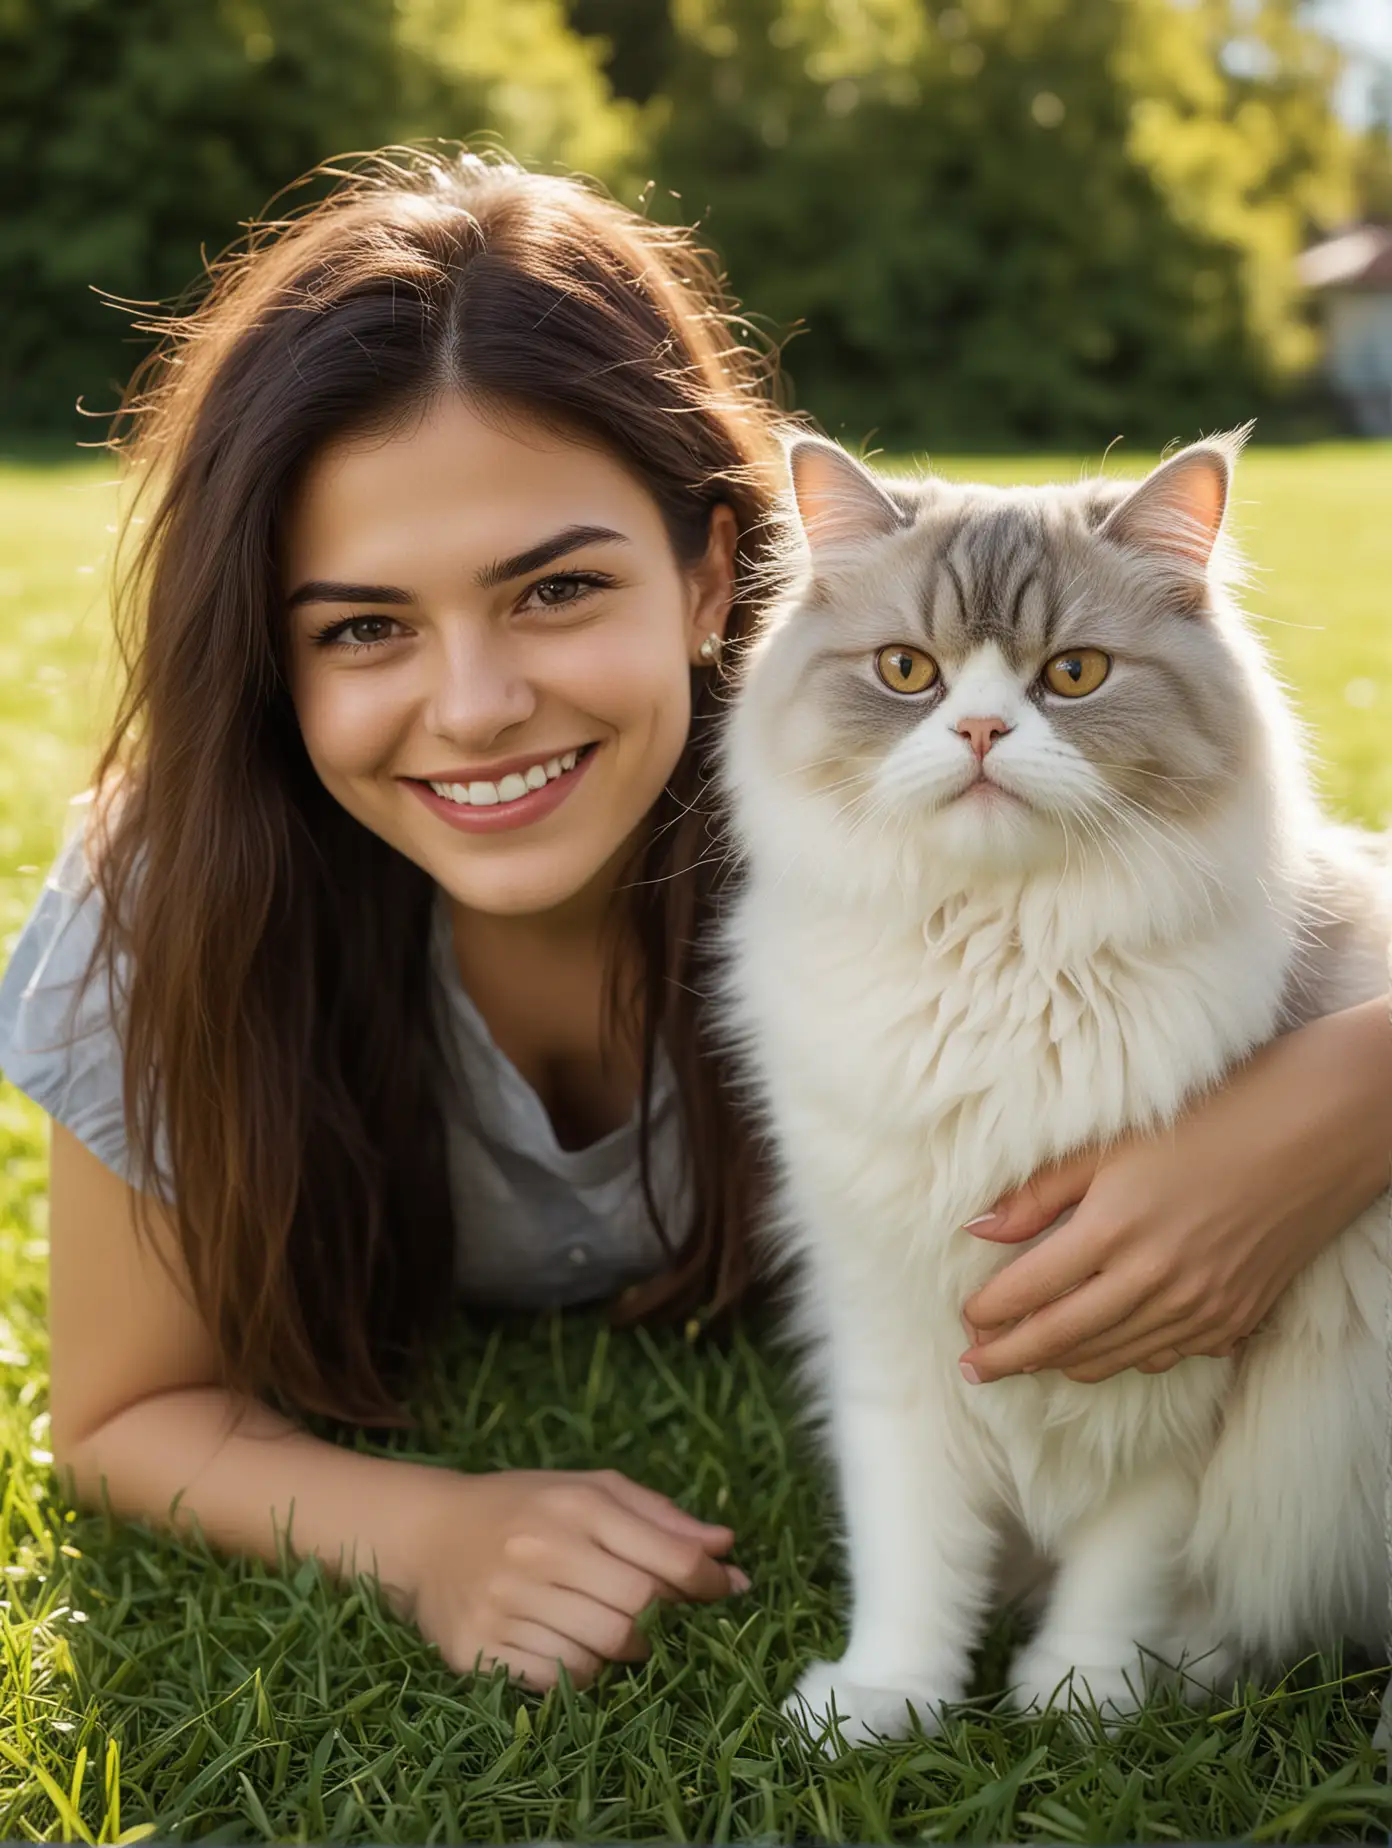 Young Woman Smiling with Persian Cat Outdoors